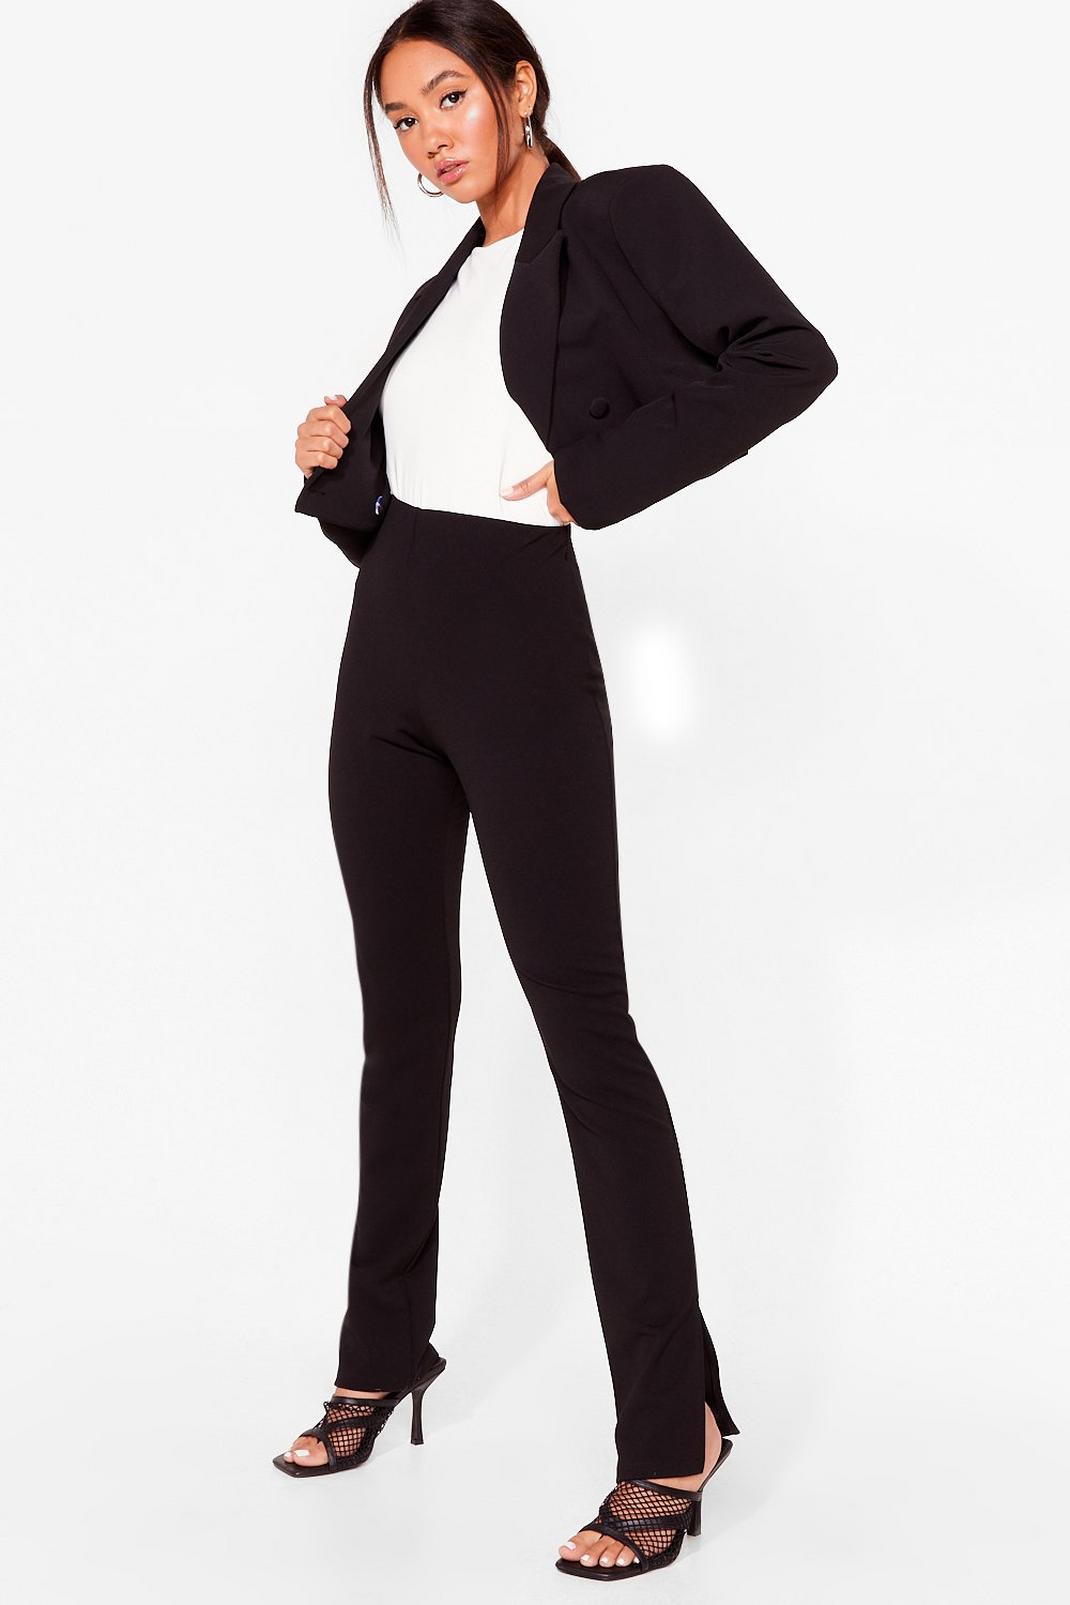 Slit's Your Call Petite High-Waisted Pants image number 1